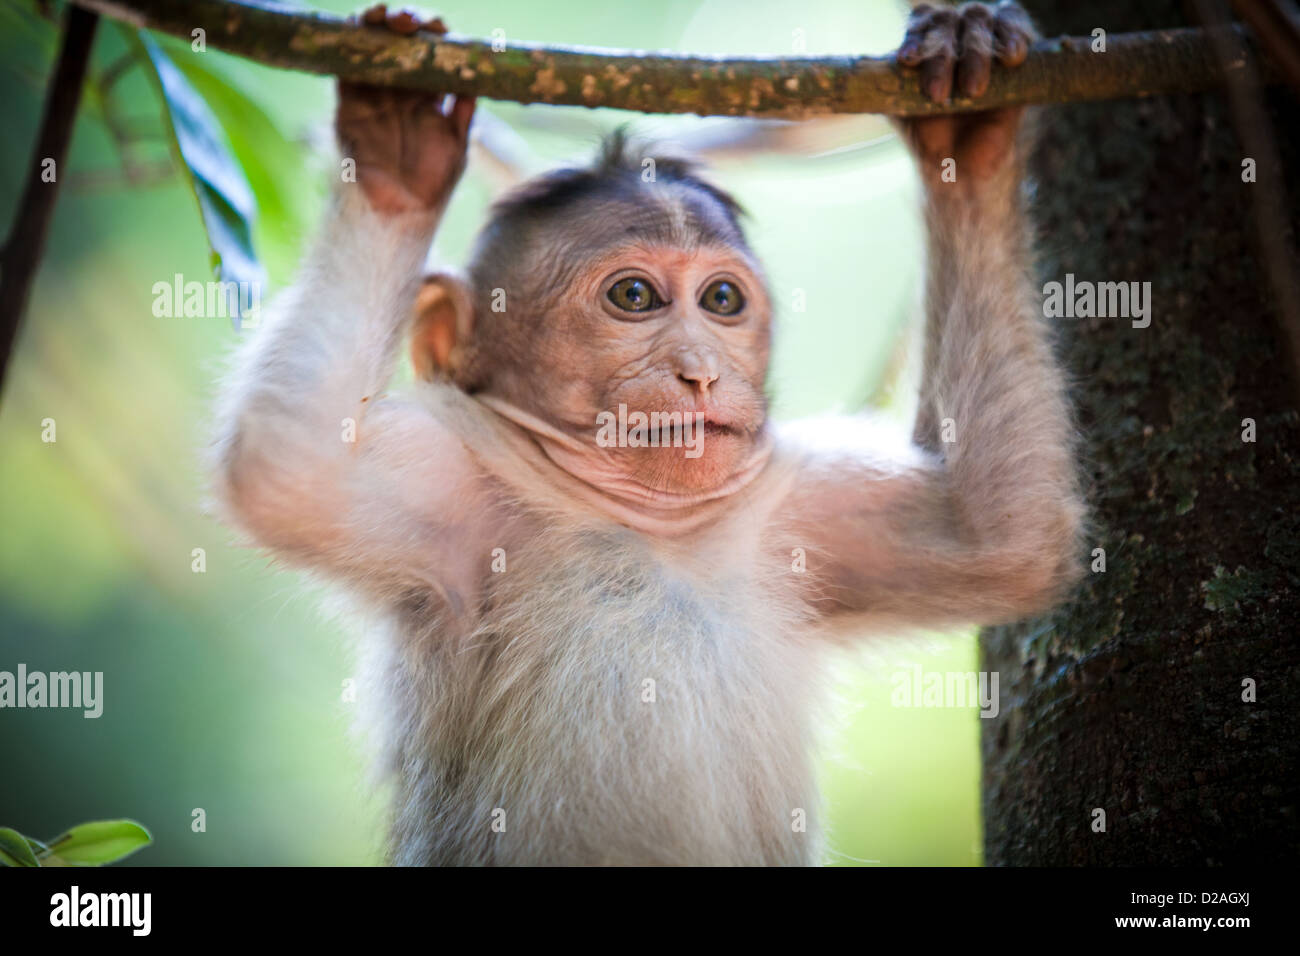 A monkey swinging from a tree in Goa, India Stock Photo